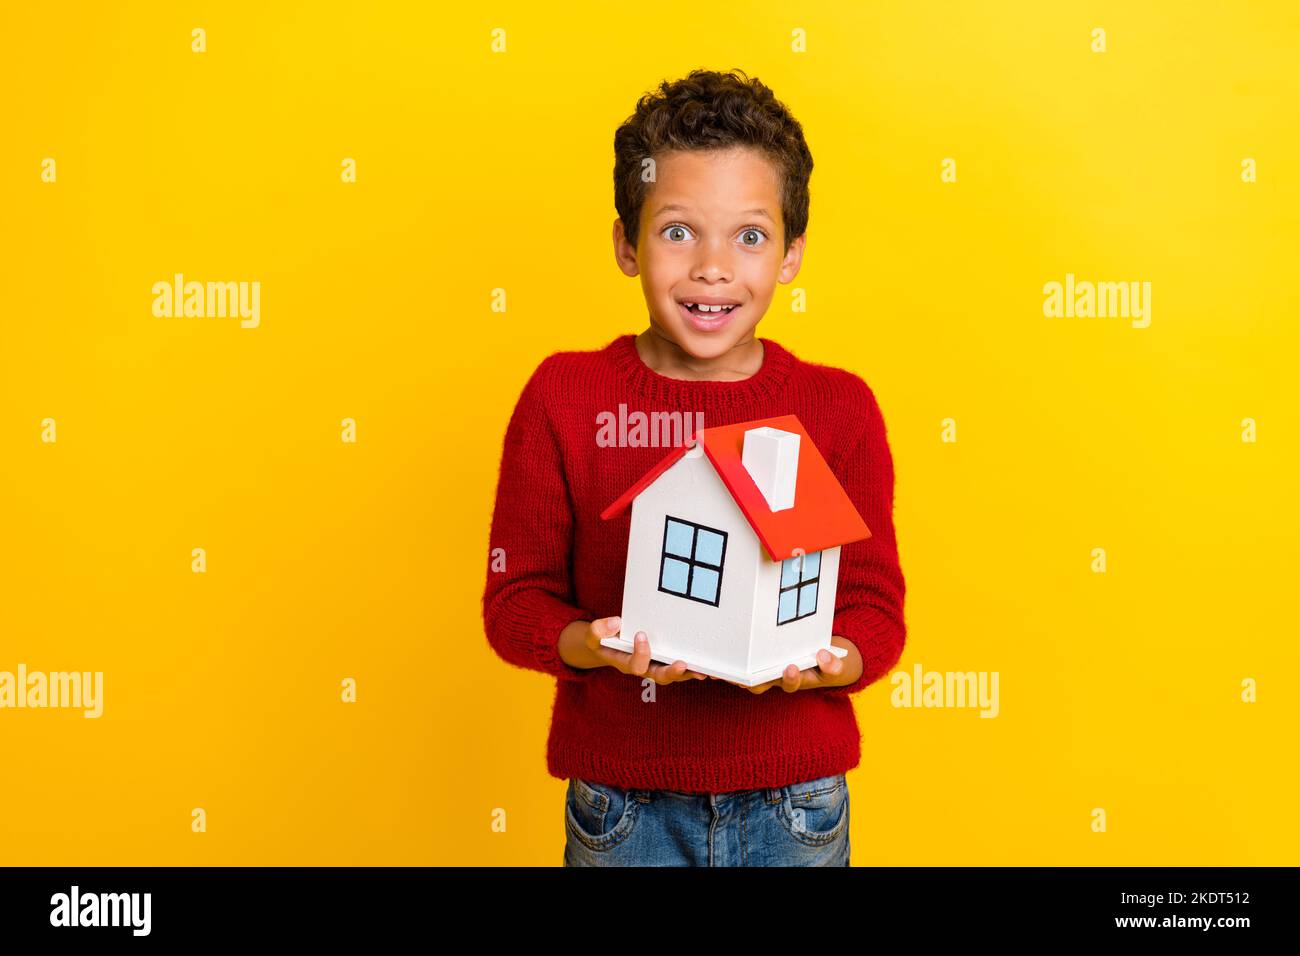 Photo portrait of charming small boy hold mini house buy property dressed stylish red knitted garment isolated on yellow color background Stock Photo